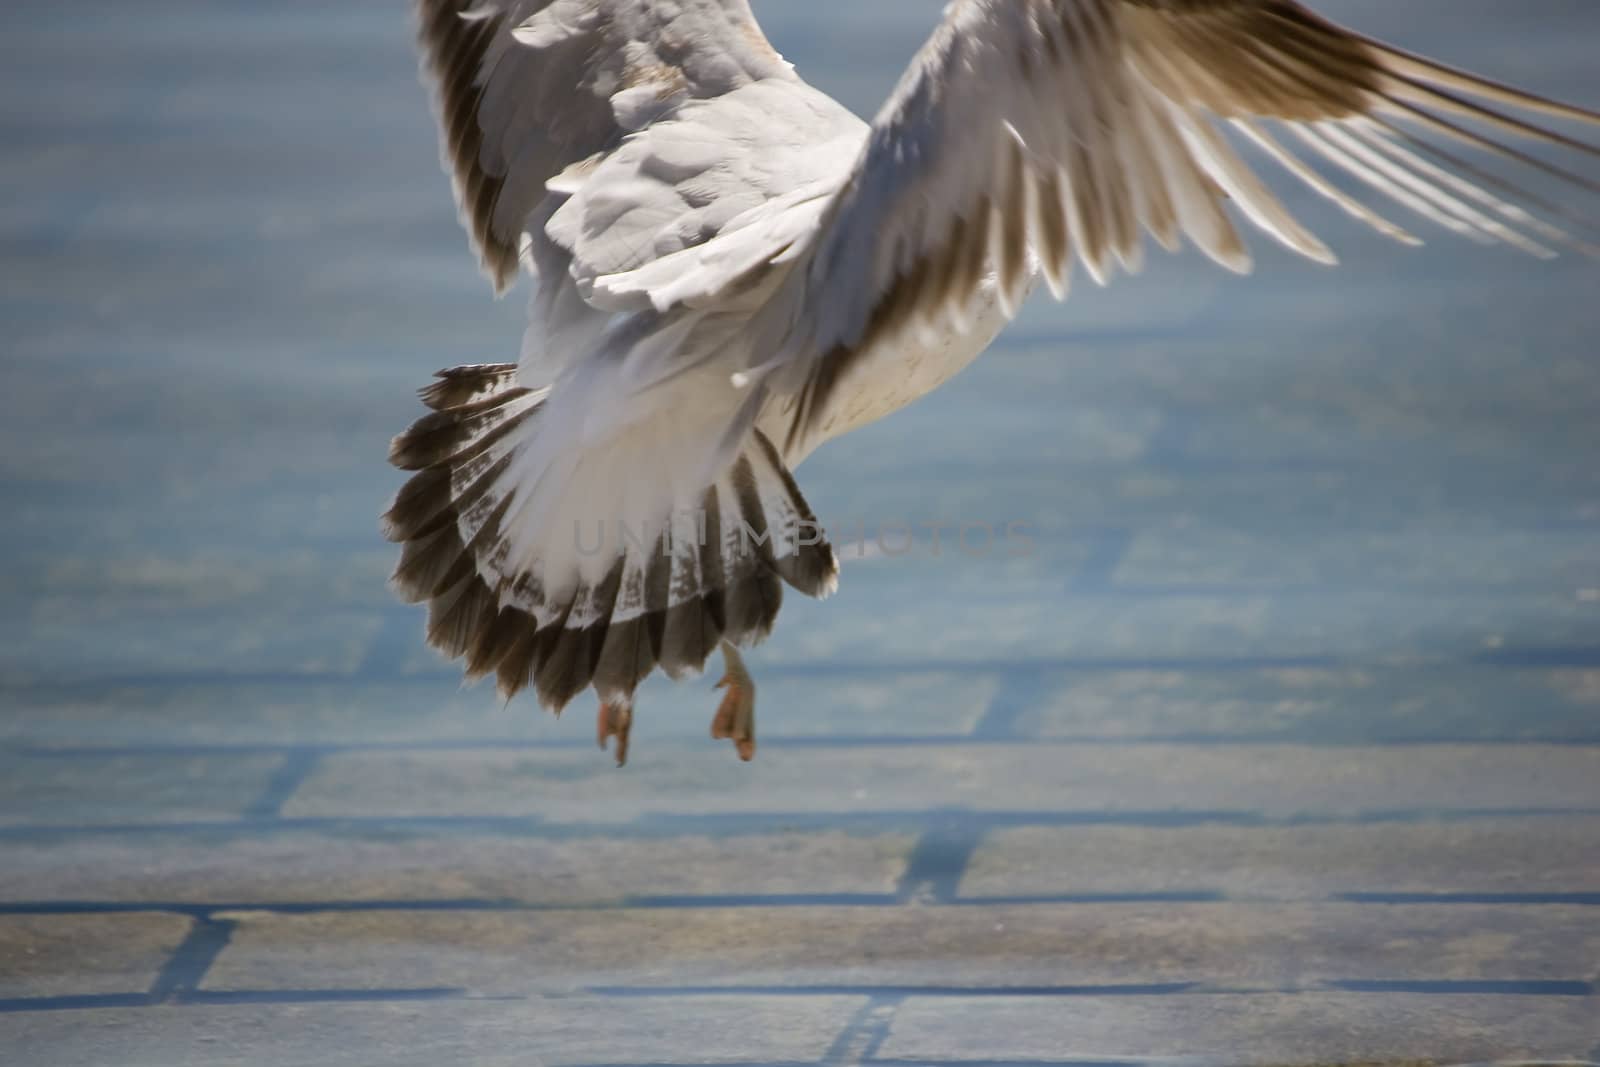 A seagull coming in for a landing on water.